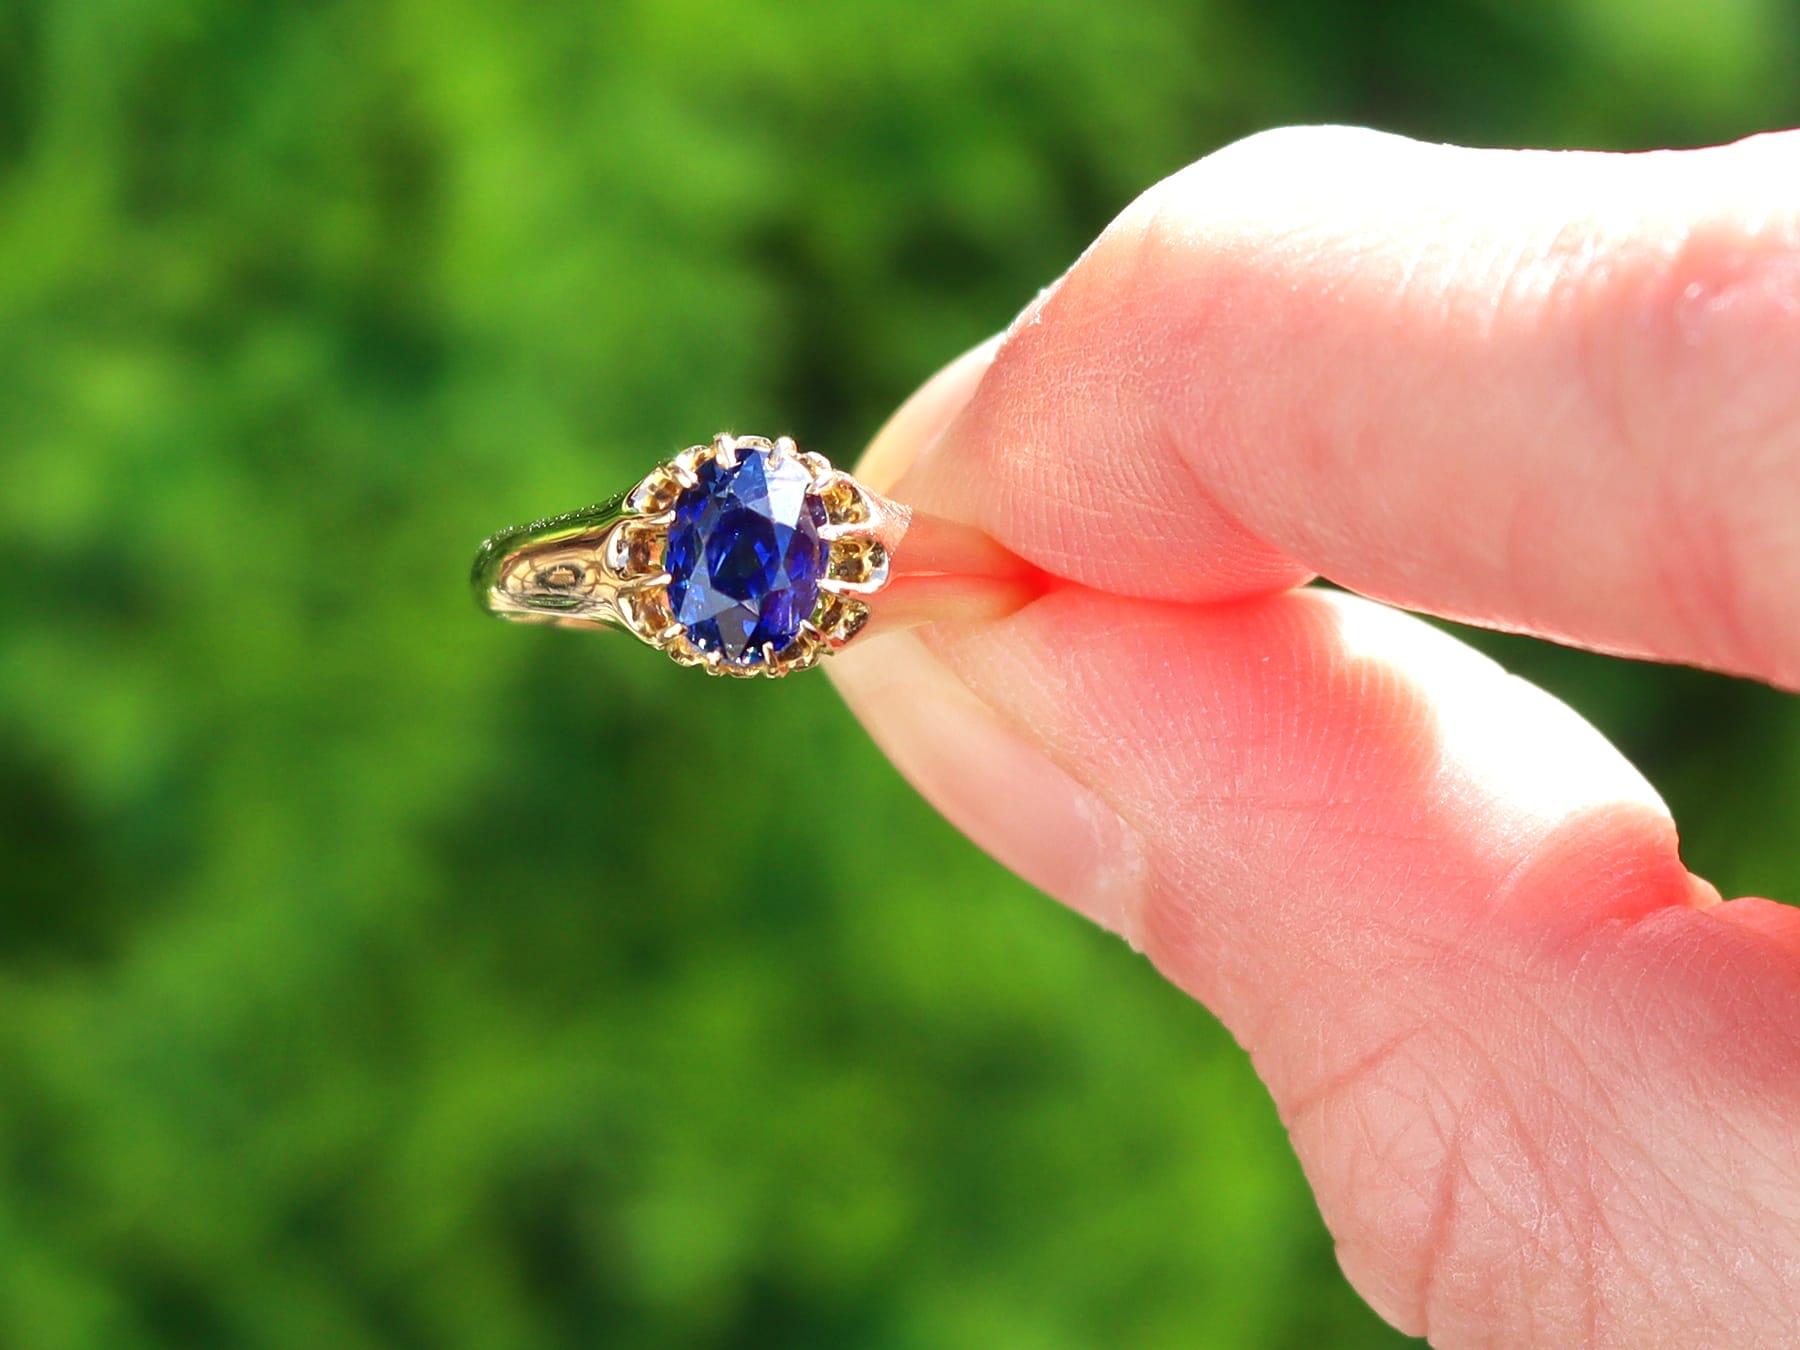 A fine and impressive antique 1.42 carat Basaltic sapphire and 14 karat yellow gold ring; part of our antique jewellery and estate jewelry collections.

This fine and impressive antique sapphire ring has been crafted in 14k yellow gold.

The gold